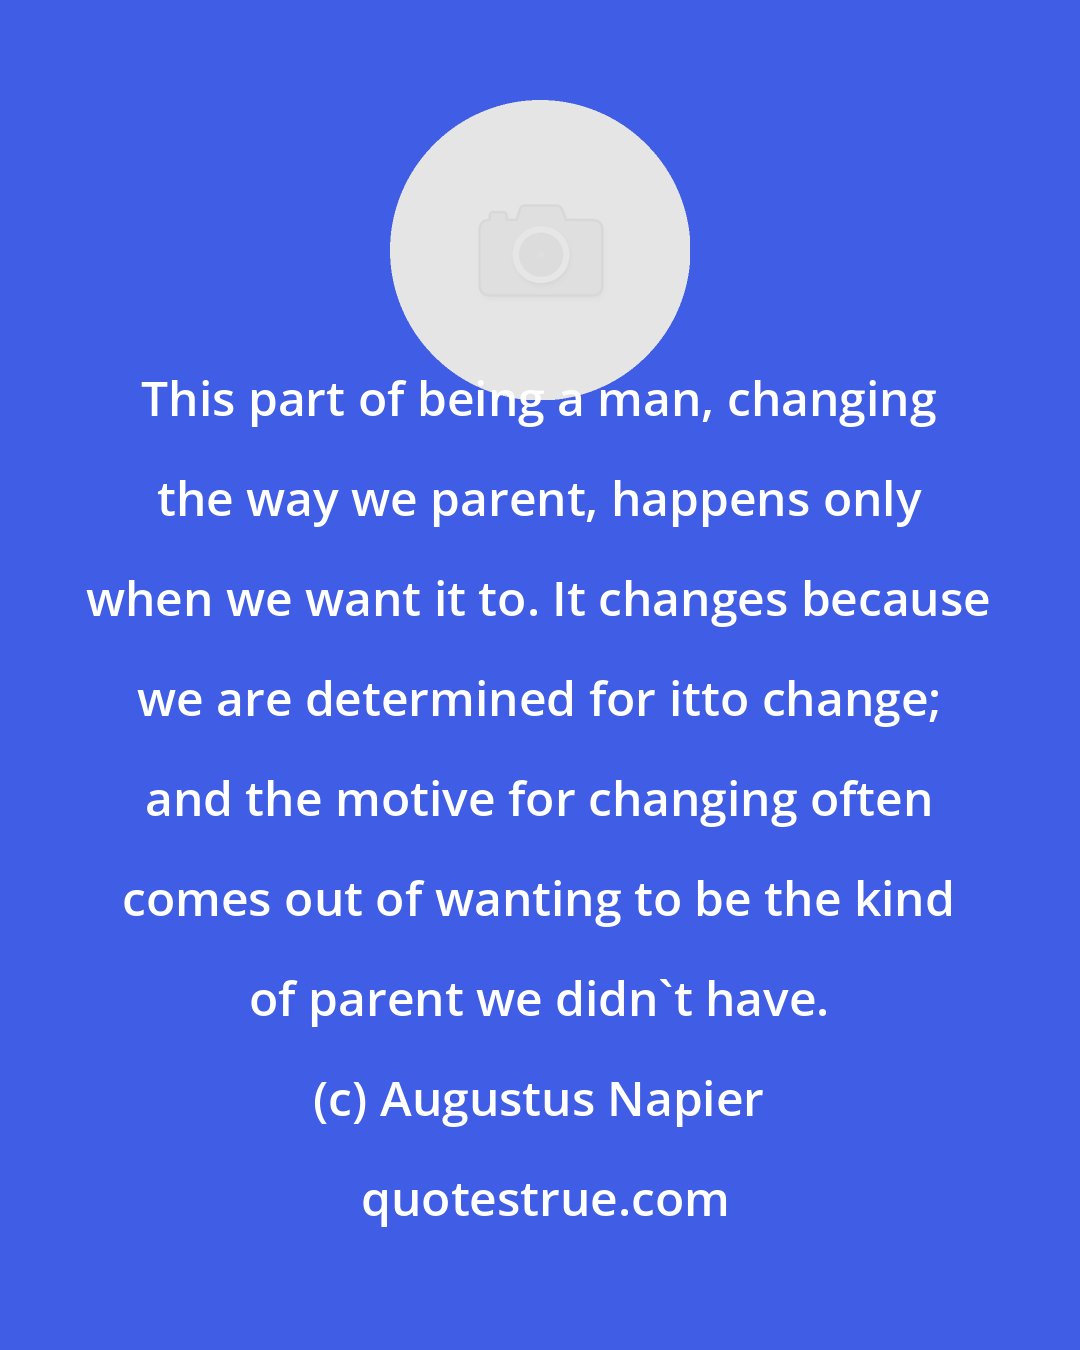 Augustus Napier: This part of being a man, changing the way we parent, happens only when we want it to. It changes because we are determined for itto change; and the motive for changing often comes out of wanting to be the kind of parent we didn't have.